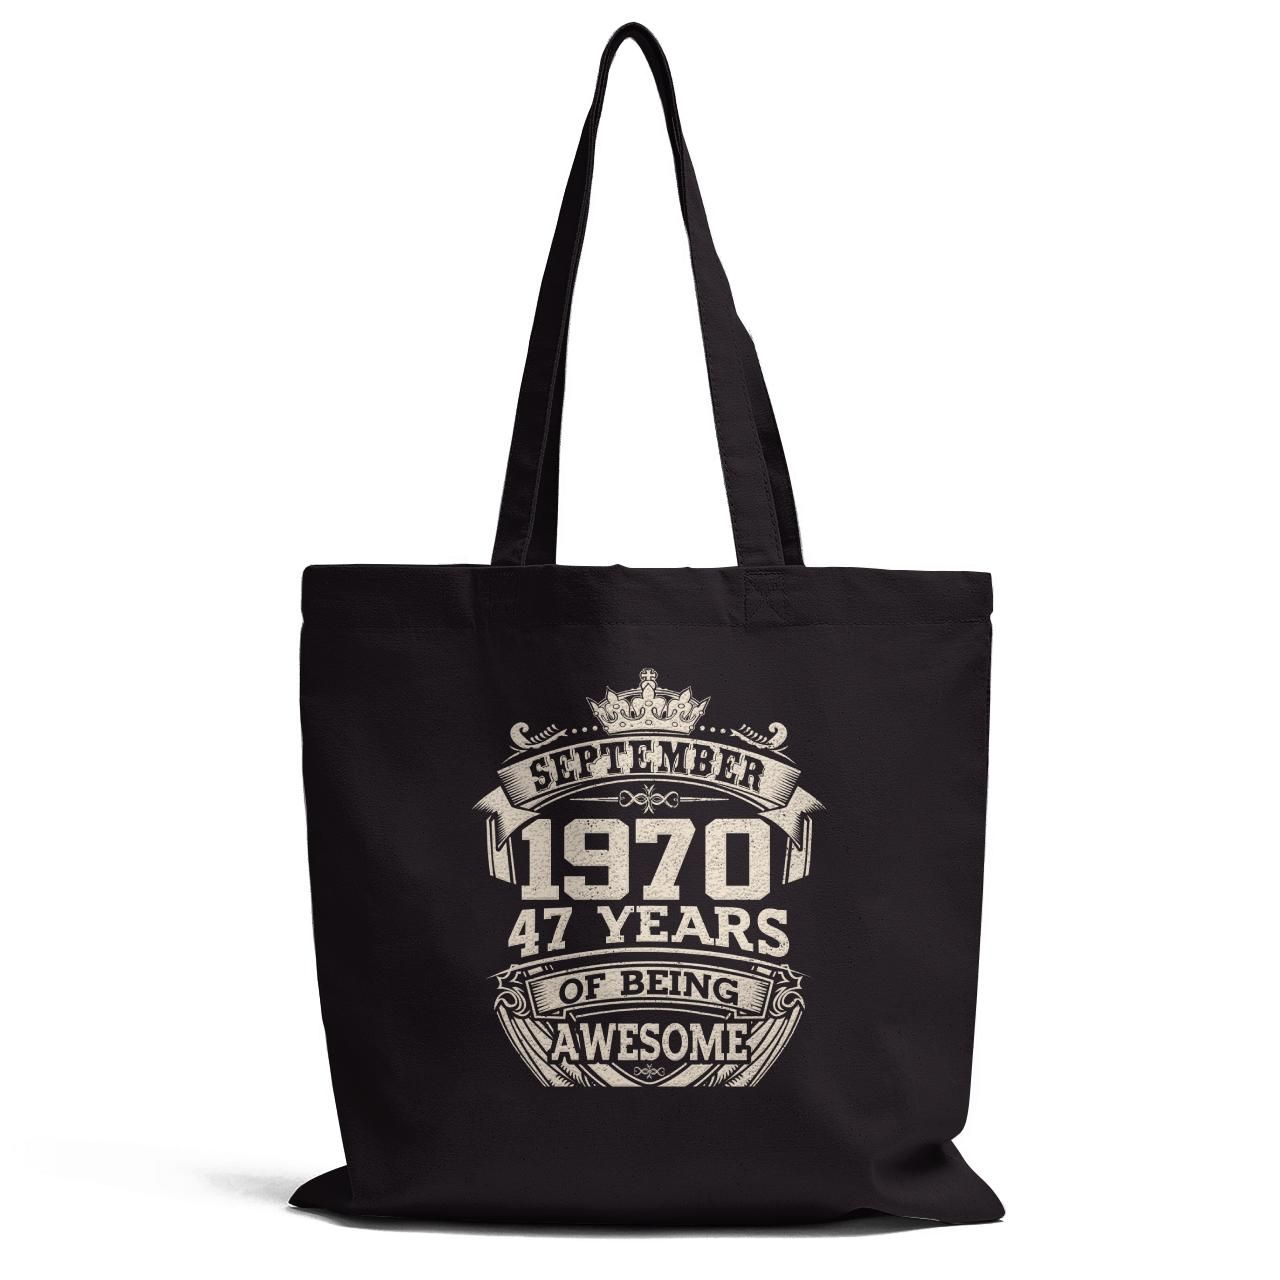 September 1970 47 Years Of Being Awesome Tote Bag